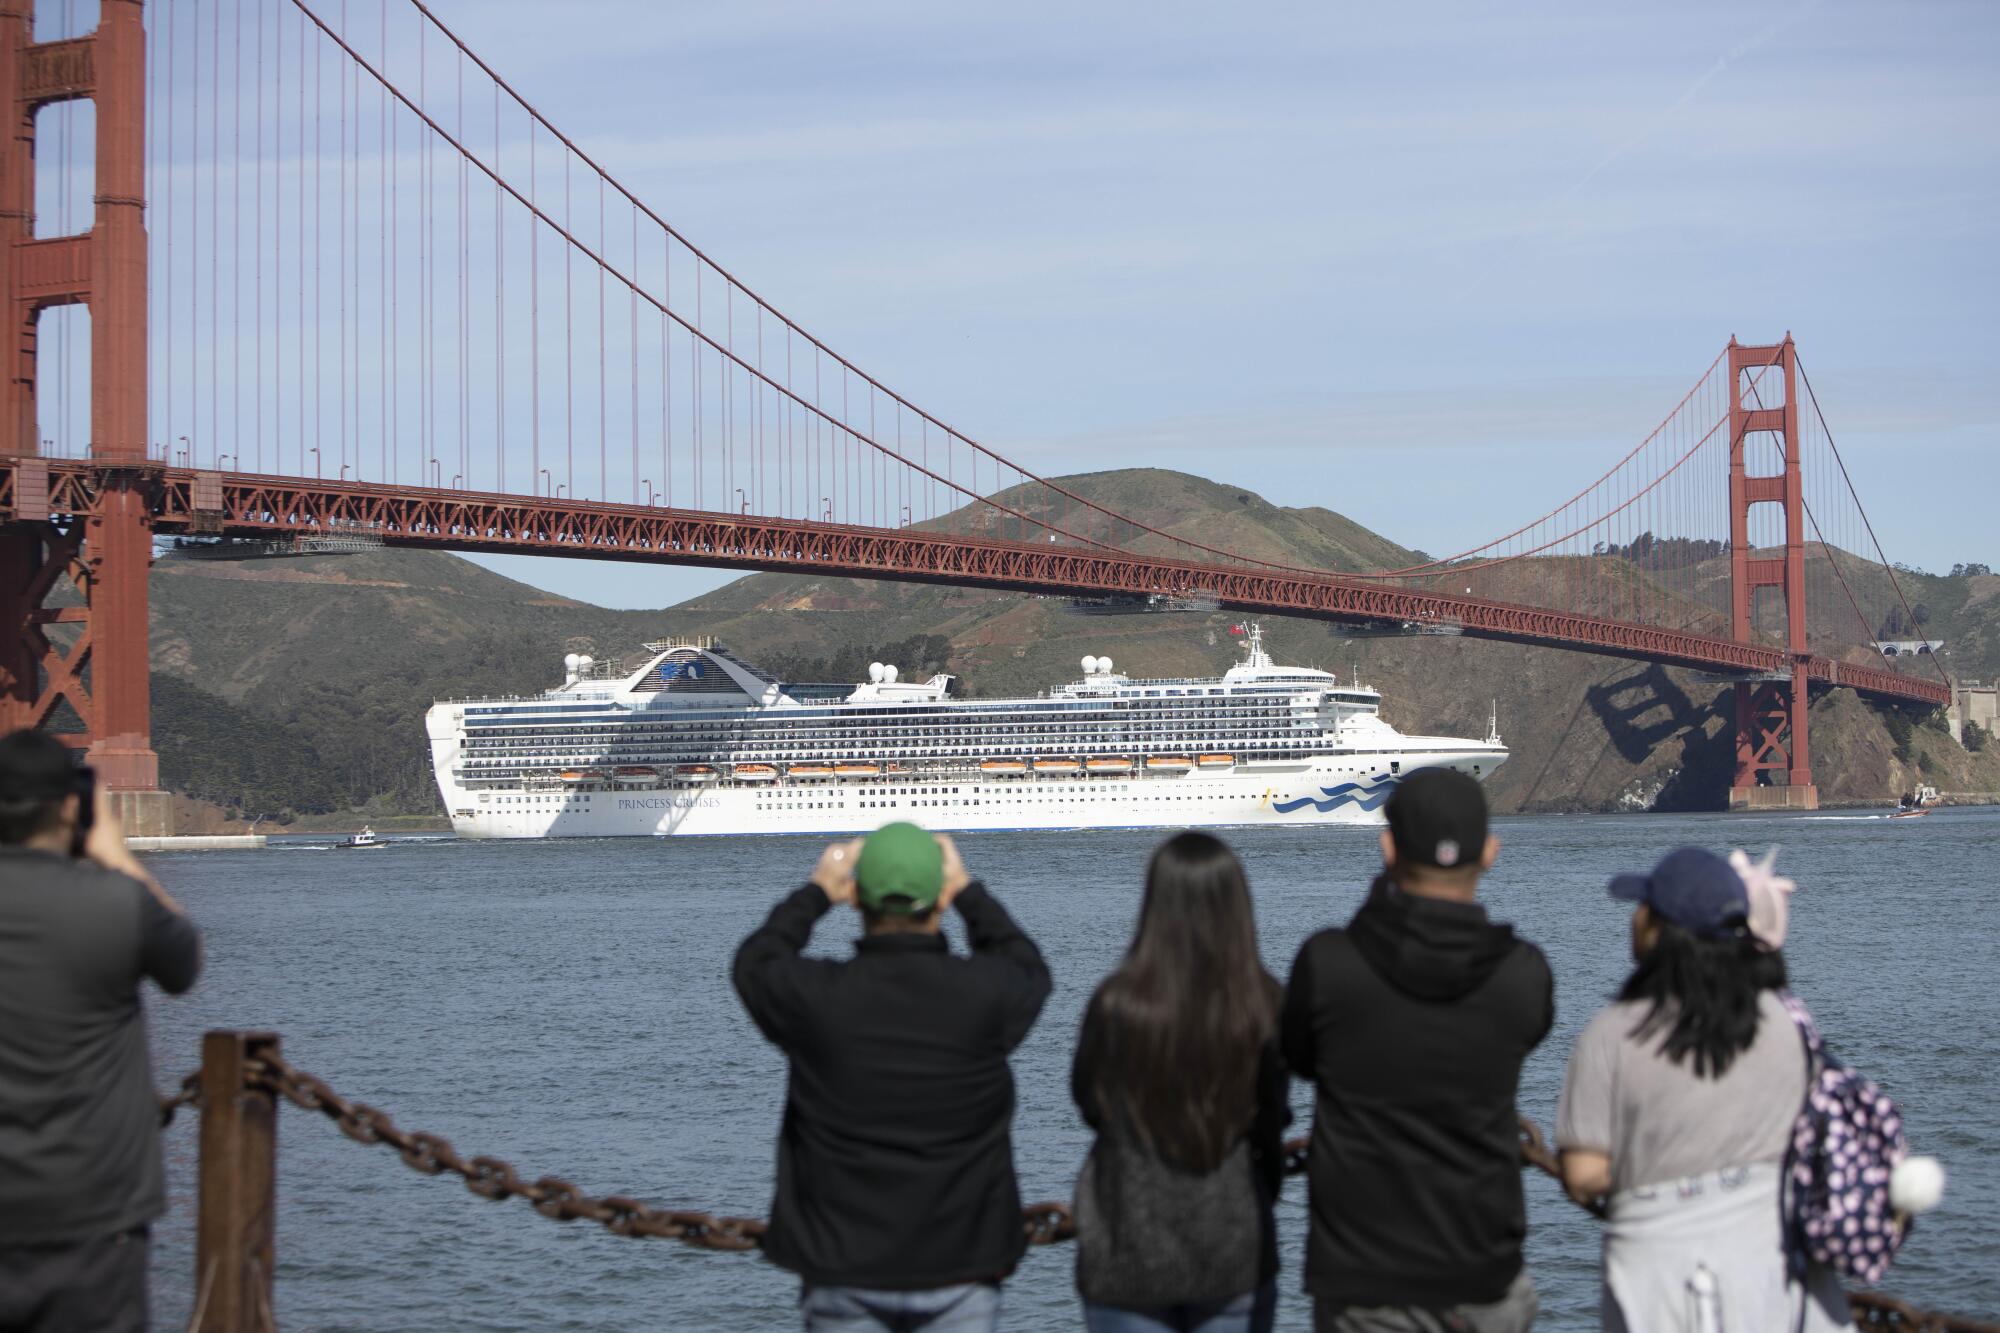 The Grand Princess cruise ship sails in under the Golden Gate Bridge on March 9 to dock at the Port of Oakland.